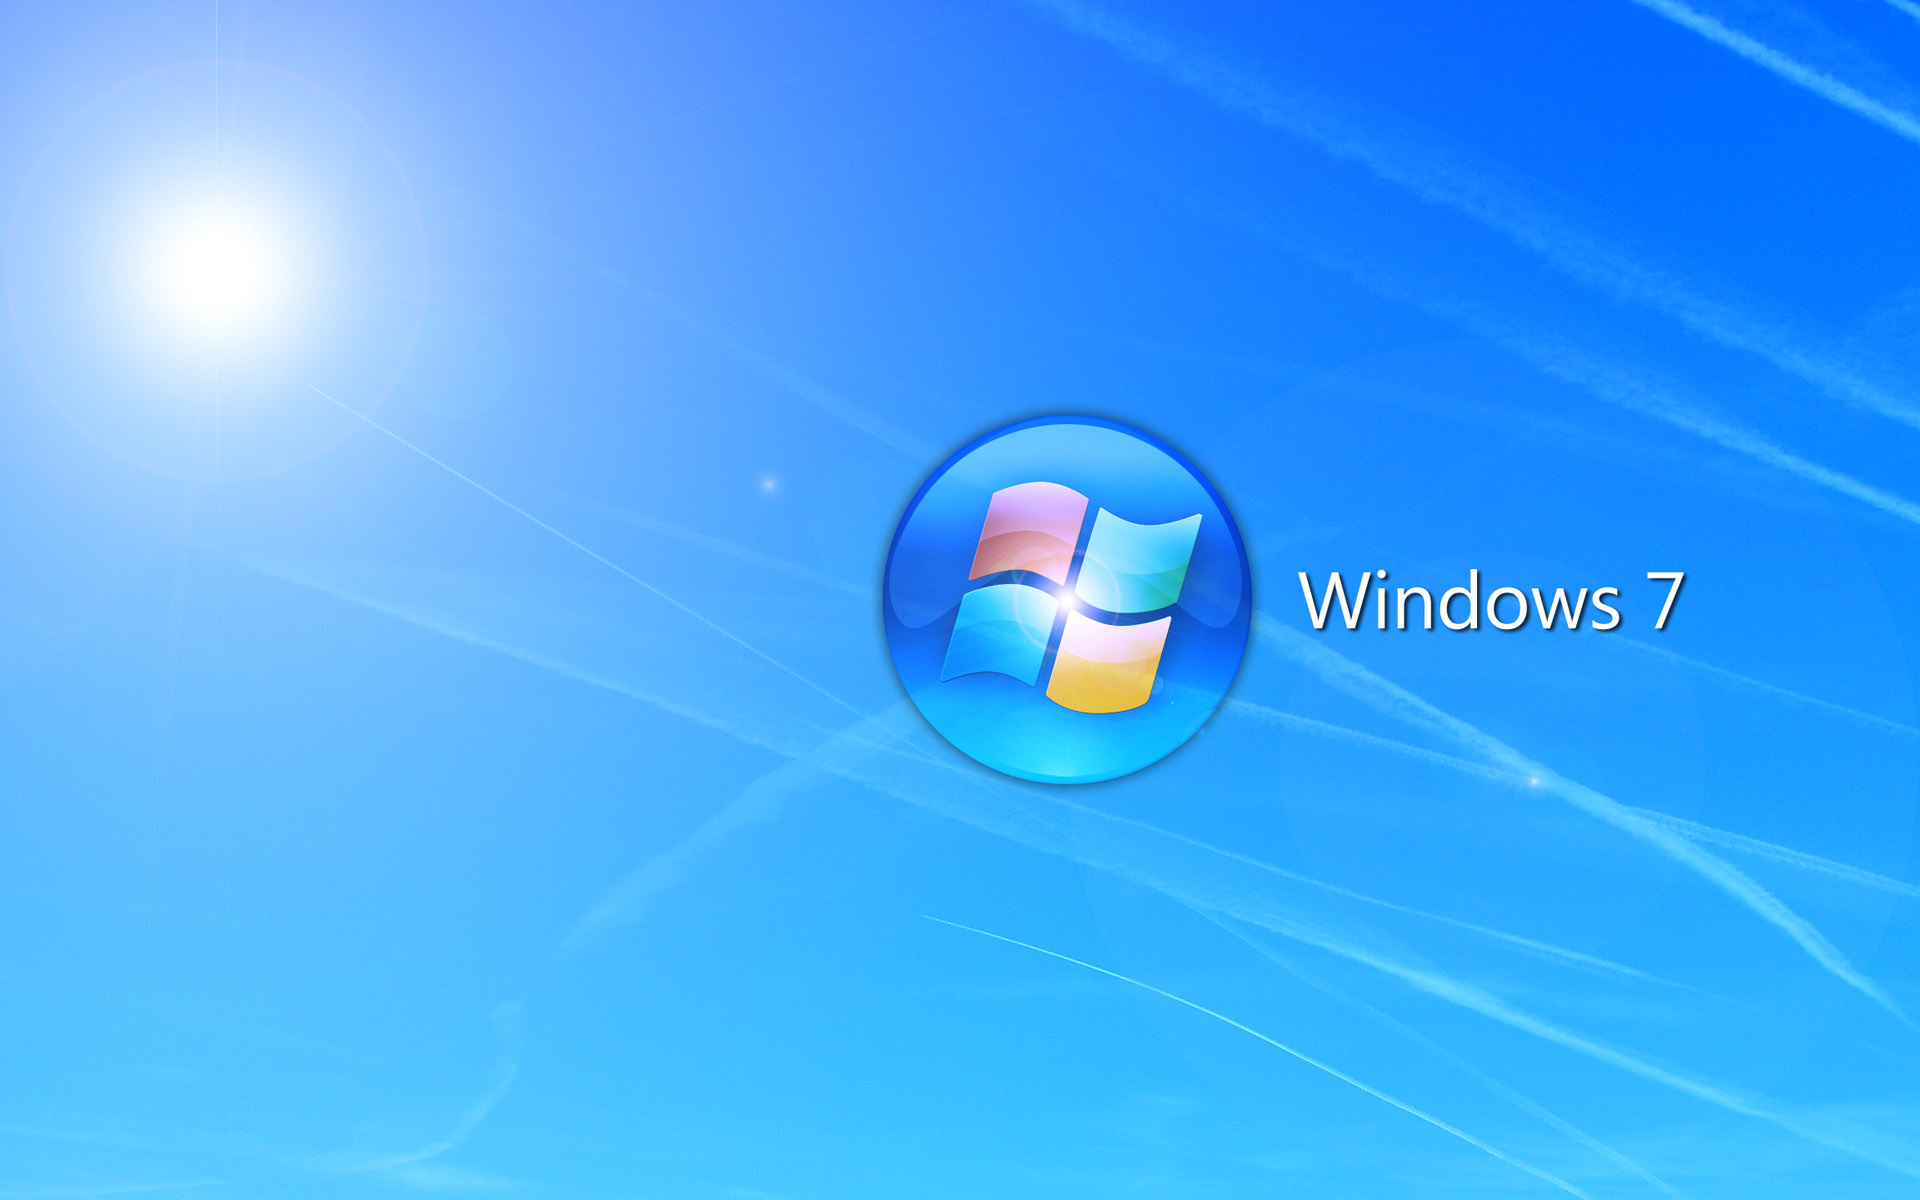 Windows Cover HD Wallpaper And Make This For Your Desktop